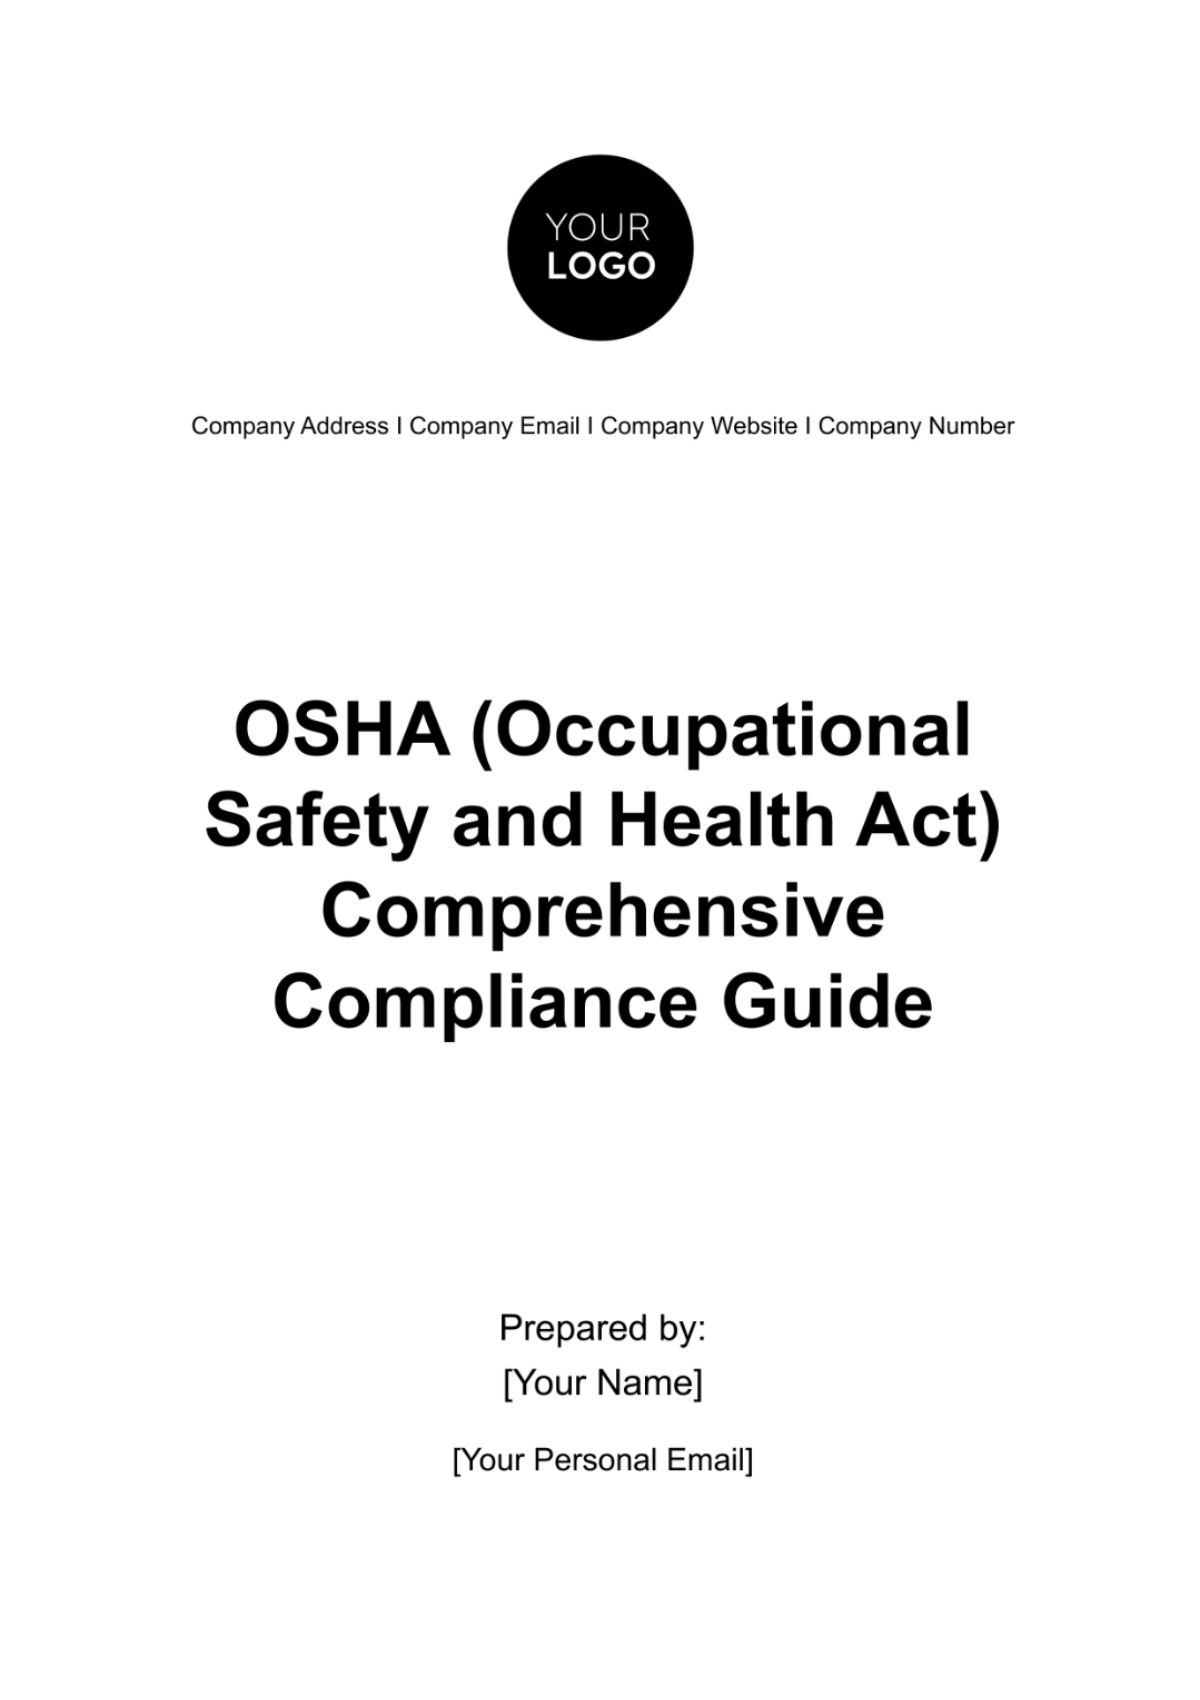 Free OSHA (Occupational Safety and Health Act) Comprehensive Compliance Guide HR Template